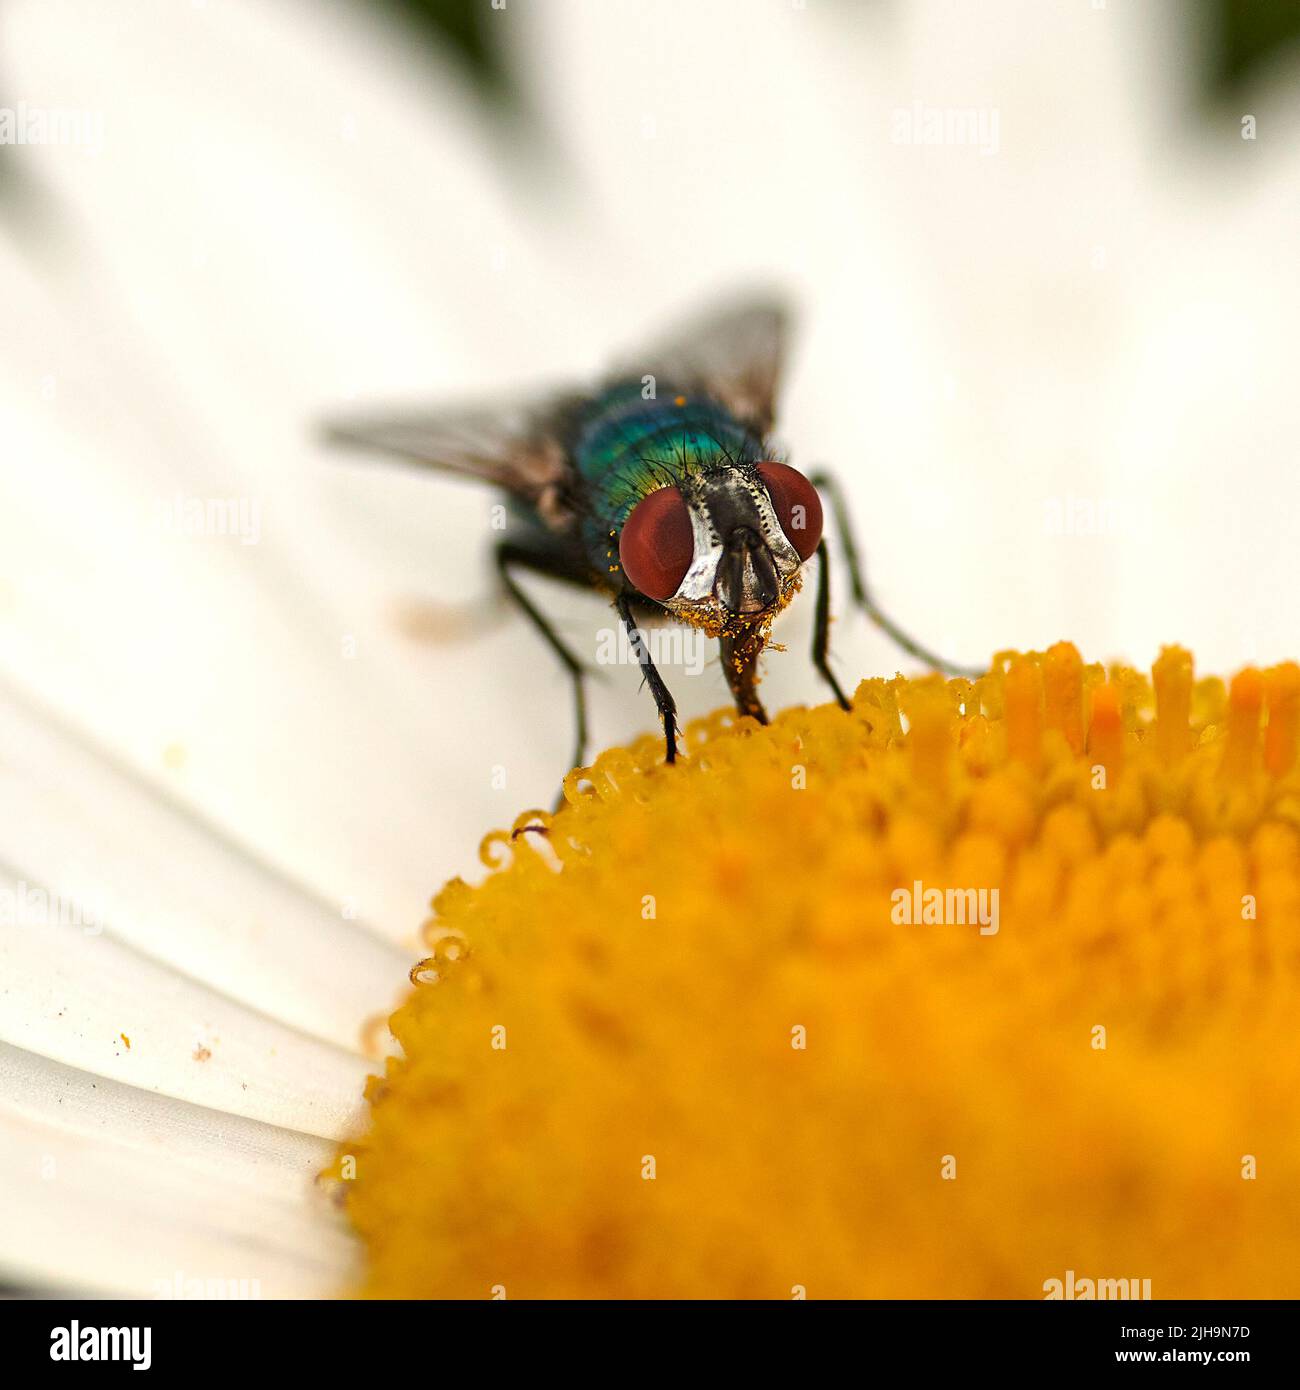 Common green bottle fly pollinating a white daisy flower. Closeup of one blowfly feeding off nectar from a yellow pistil center on a plant. Macro of a Stock Photo